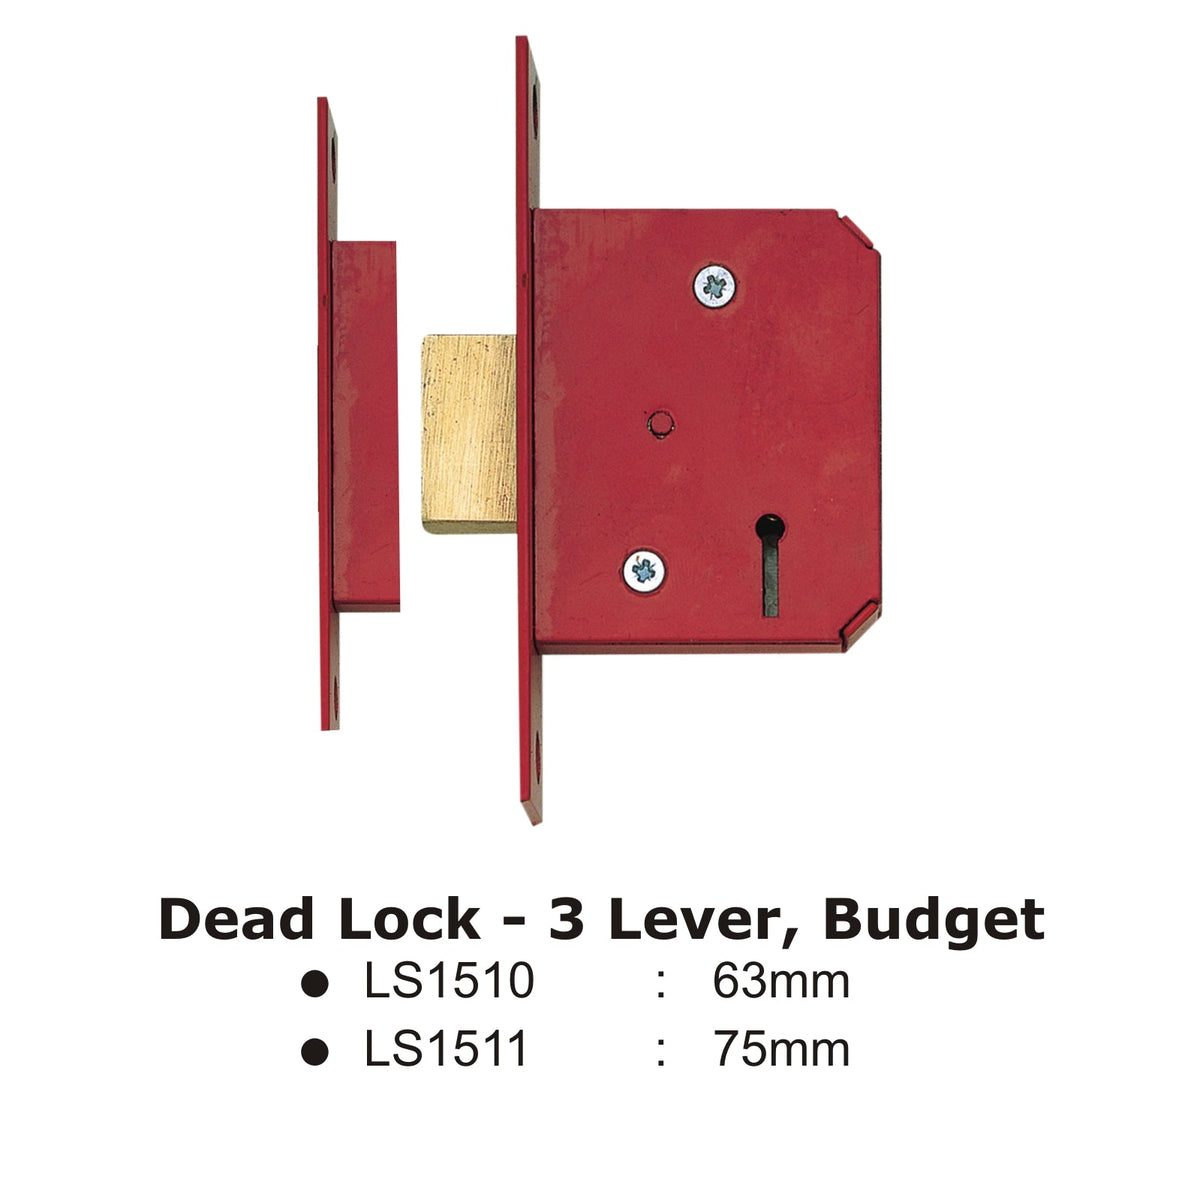 Dead Lock - 3 lever, Budget 63mm